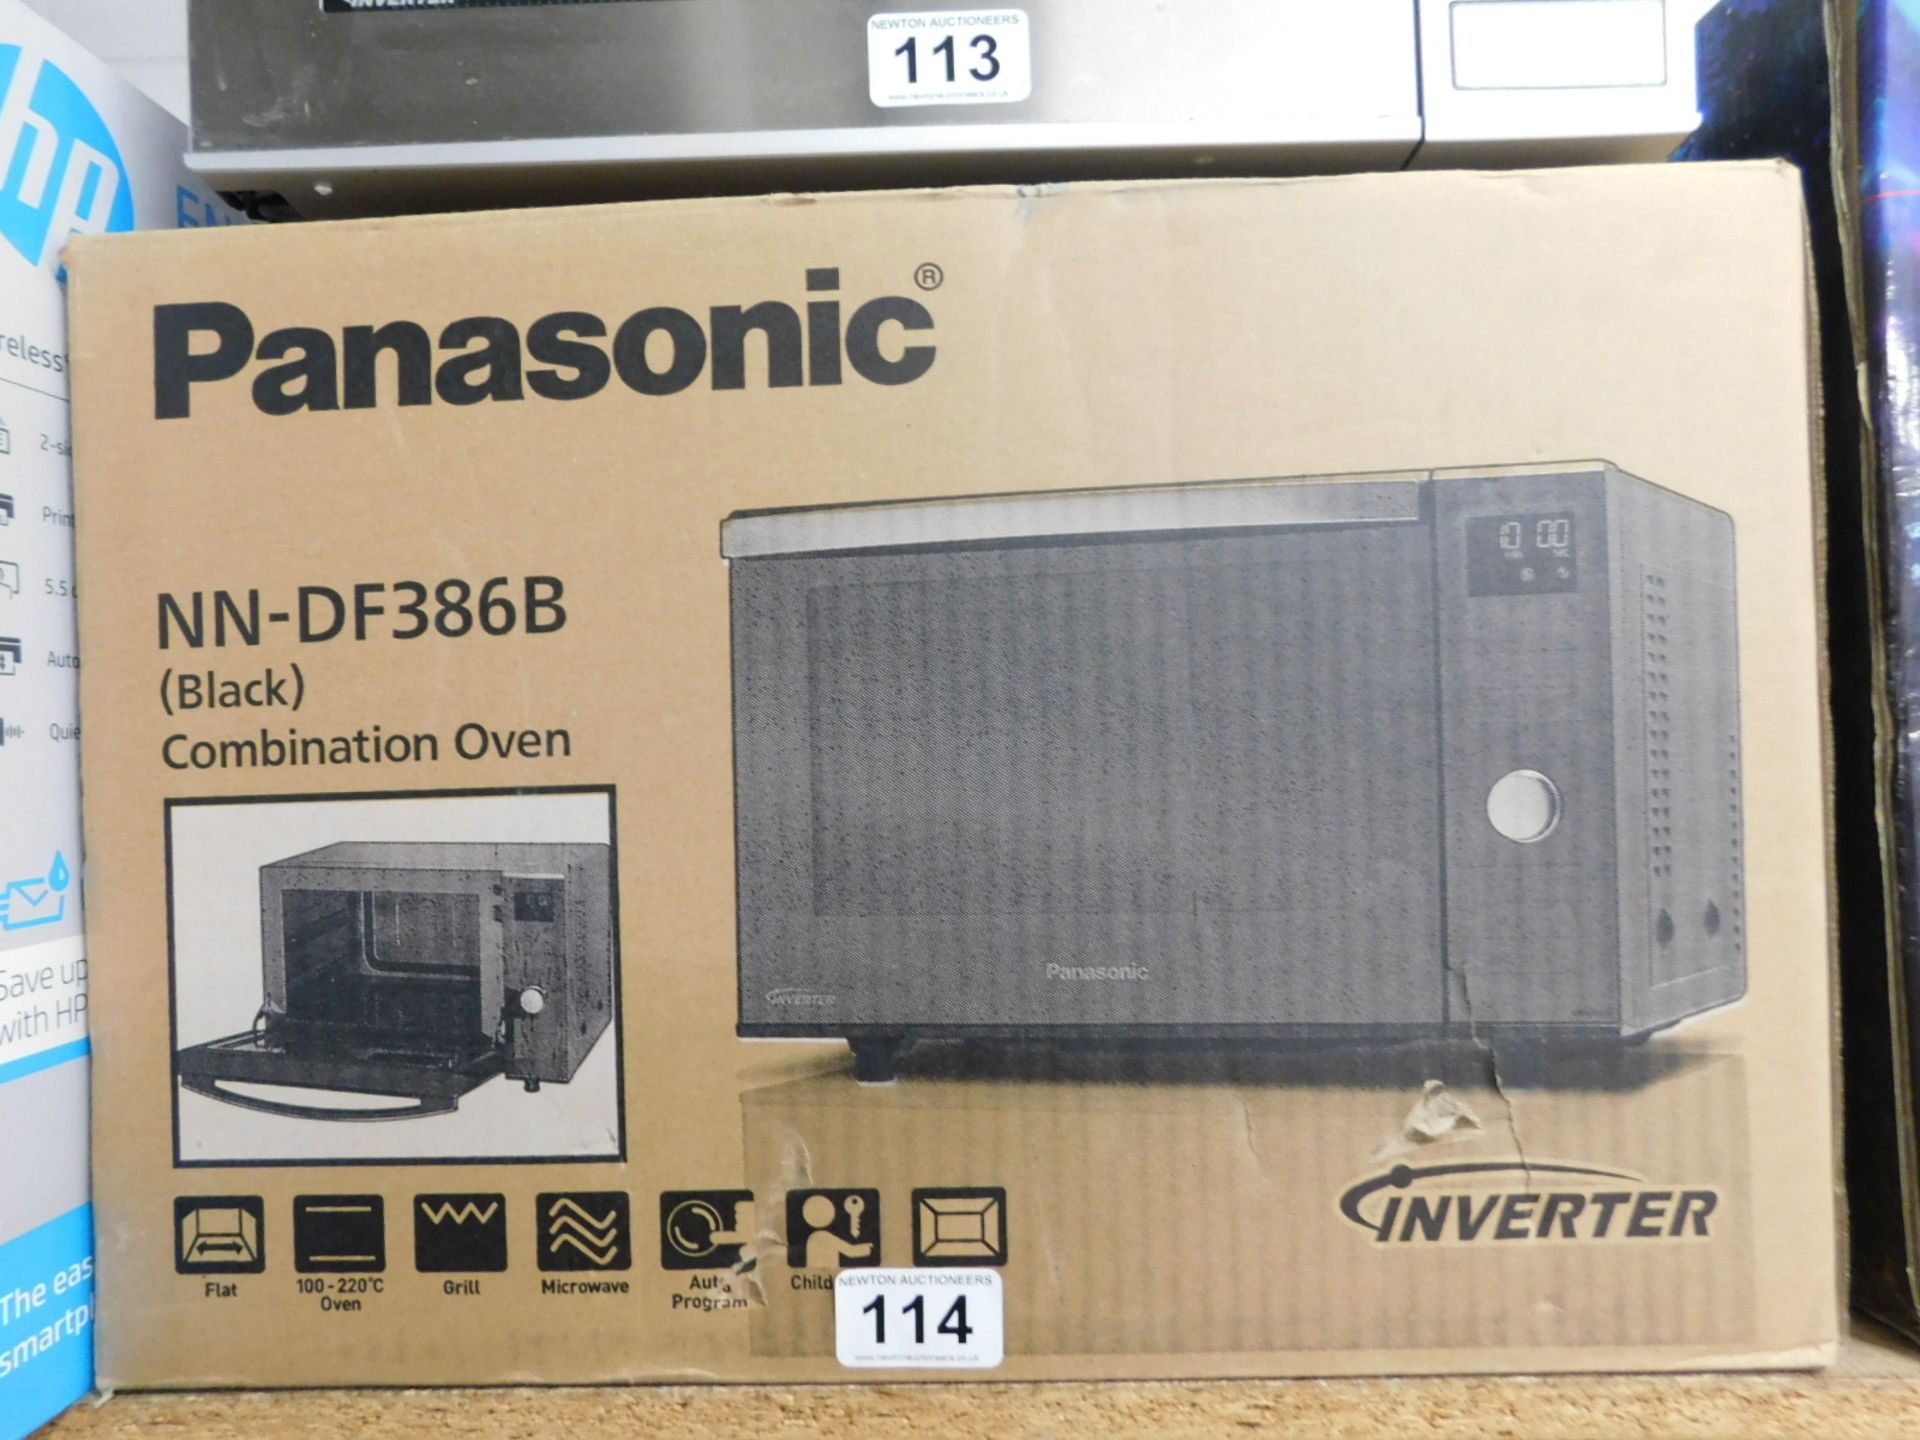 1 BOXED PANASONIC NN-DF386B 3-IN-1 1000W 23L BLACK COMBINATION MICROWAVE OVEN RRP £279.99